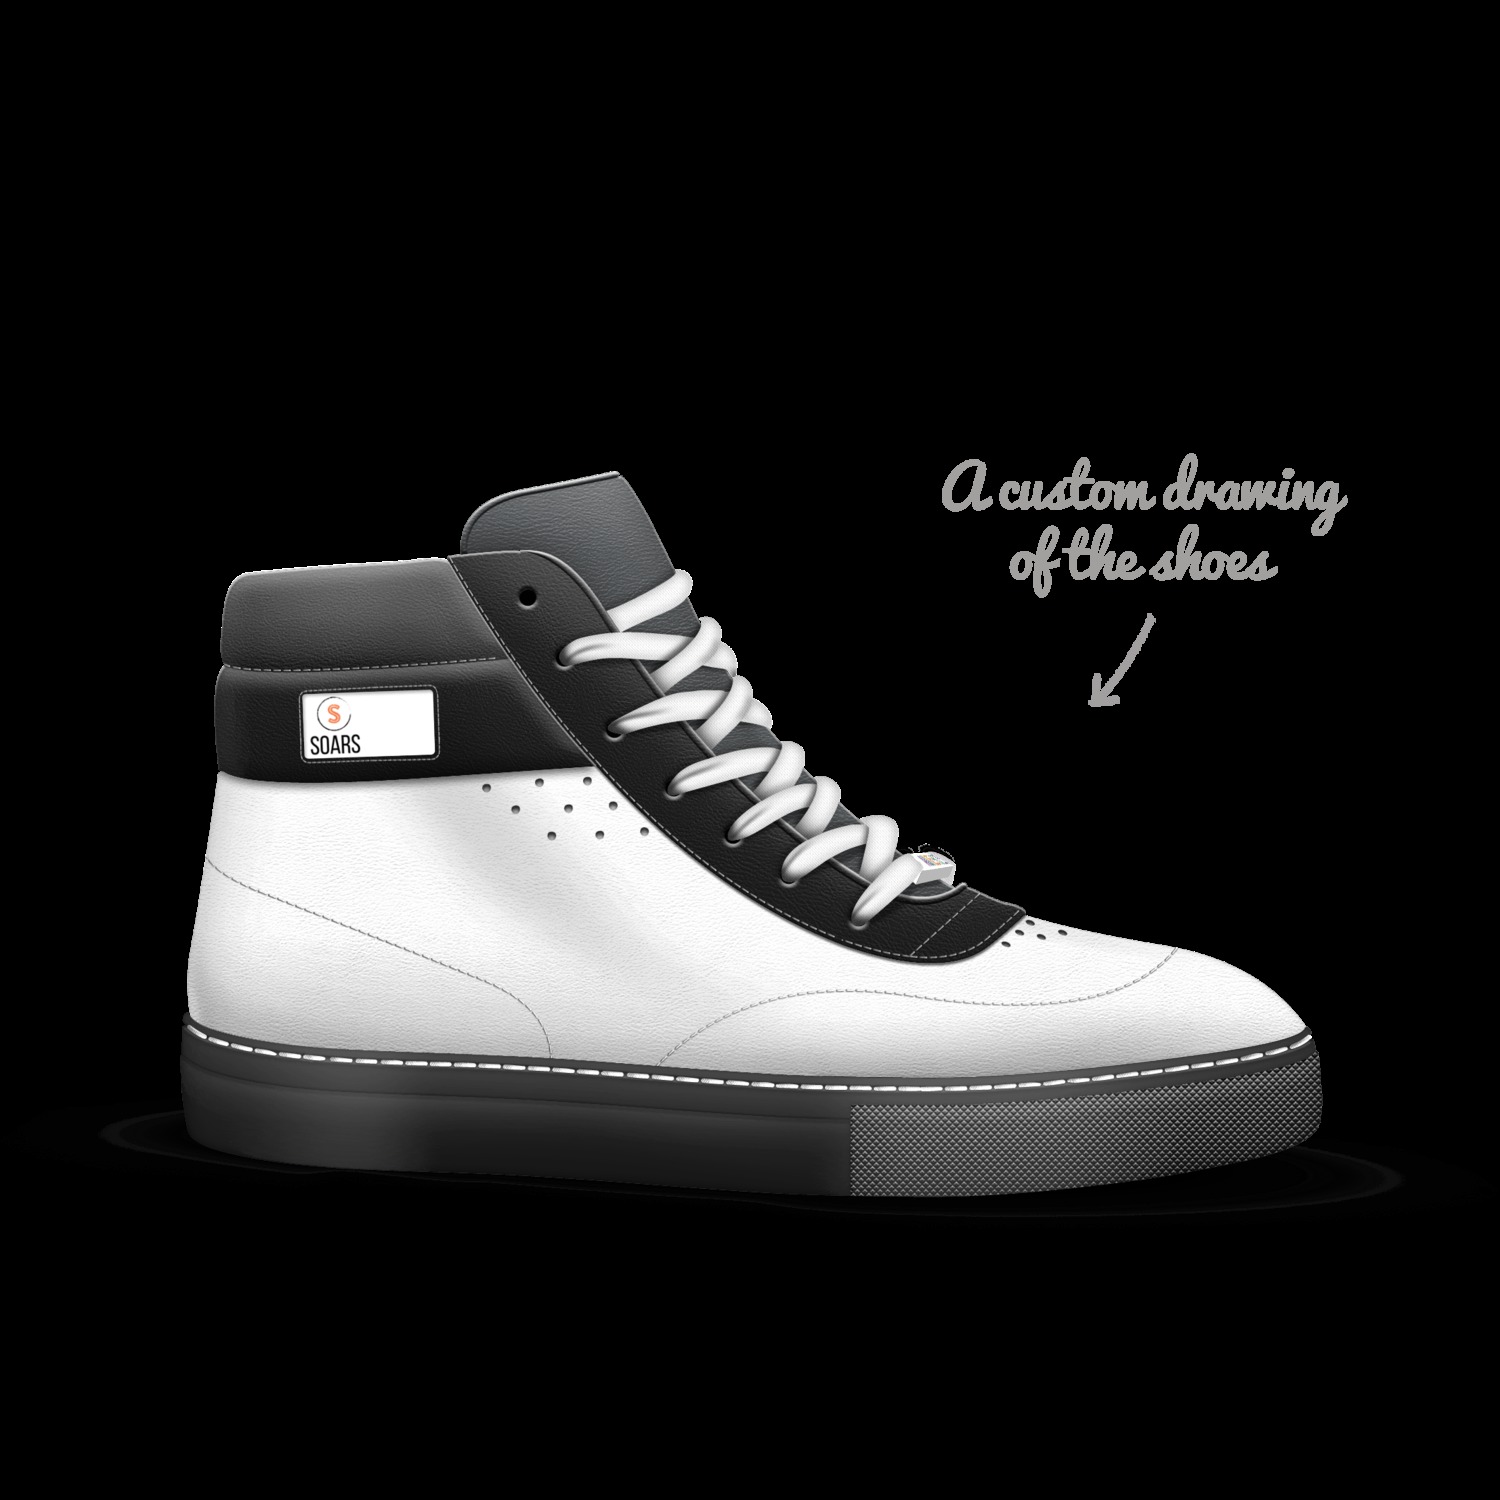 crowe casual shoes